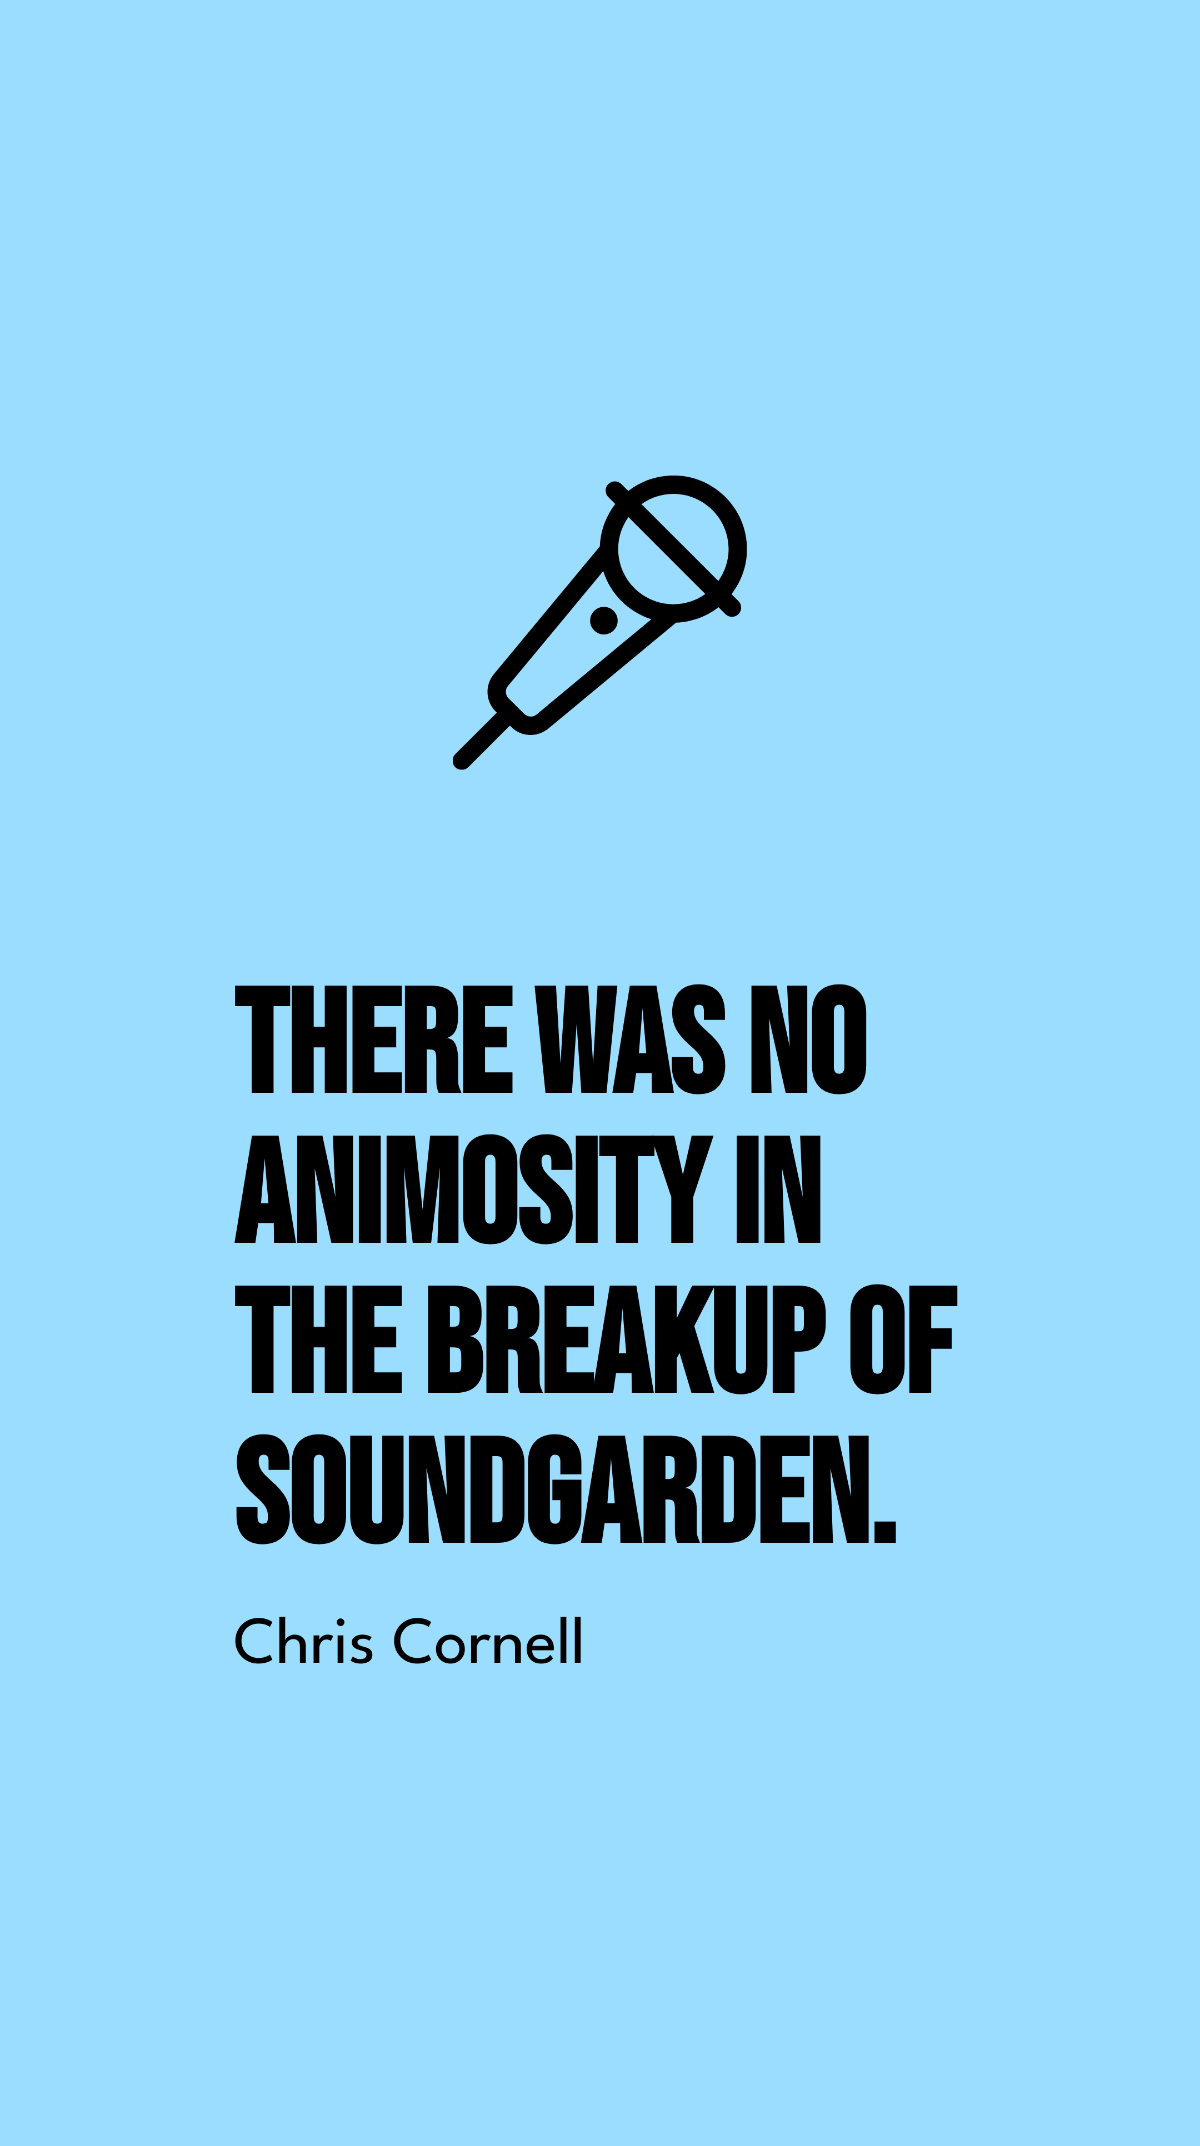 Chris Cornell - There was no animosity in the breakup of Soundgarden. Template